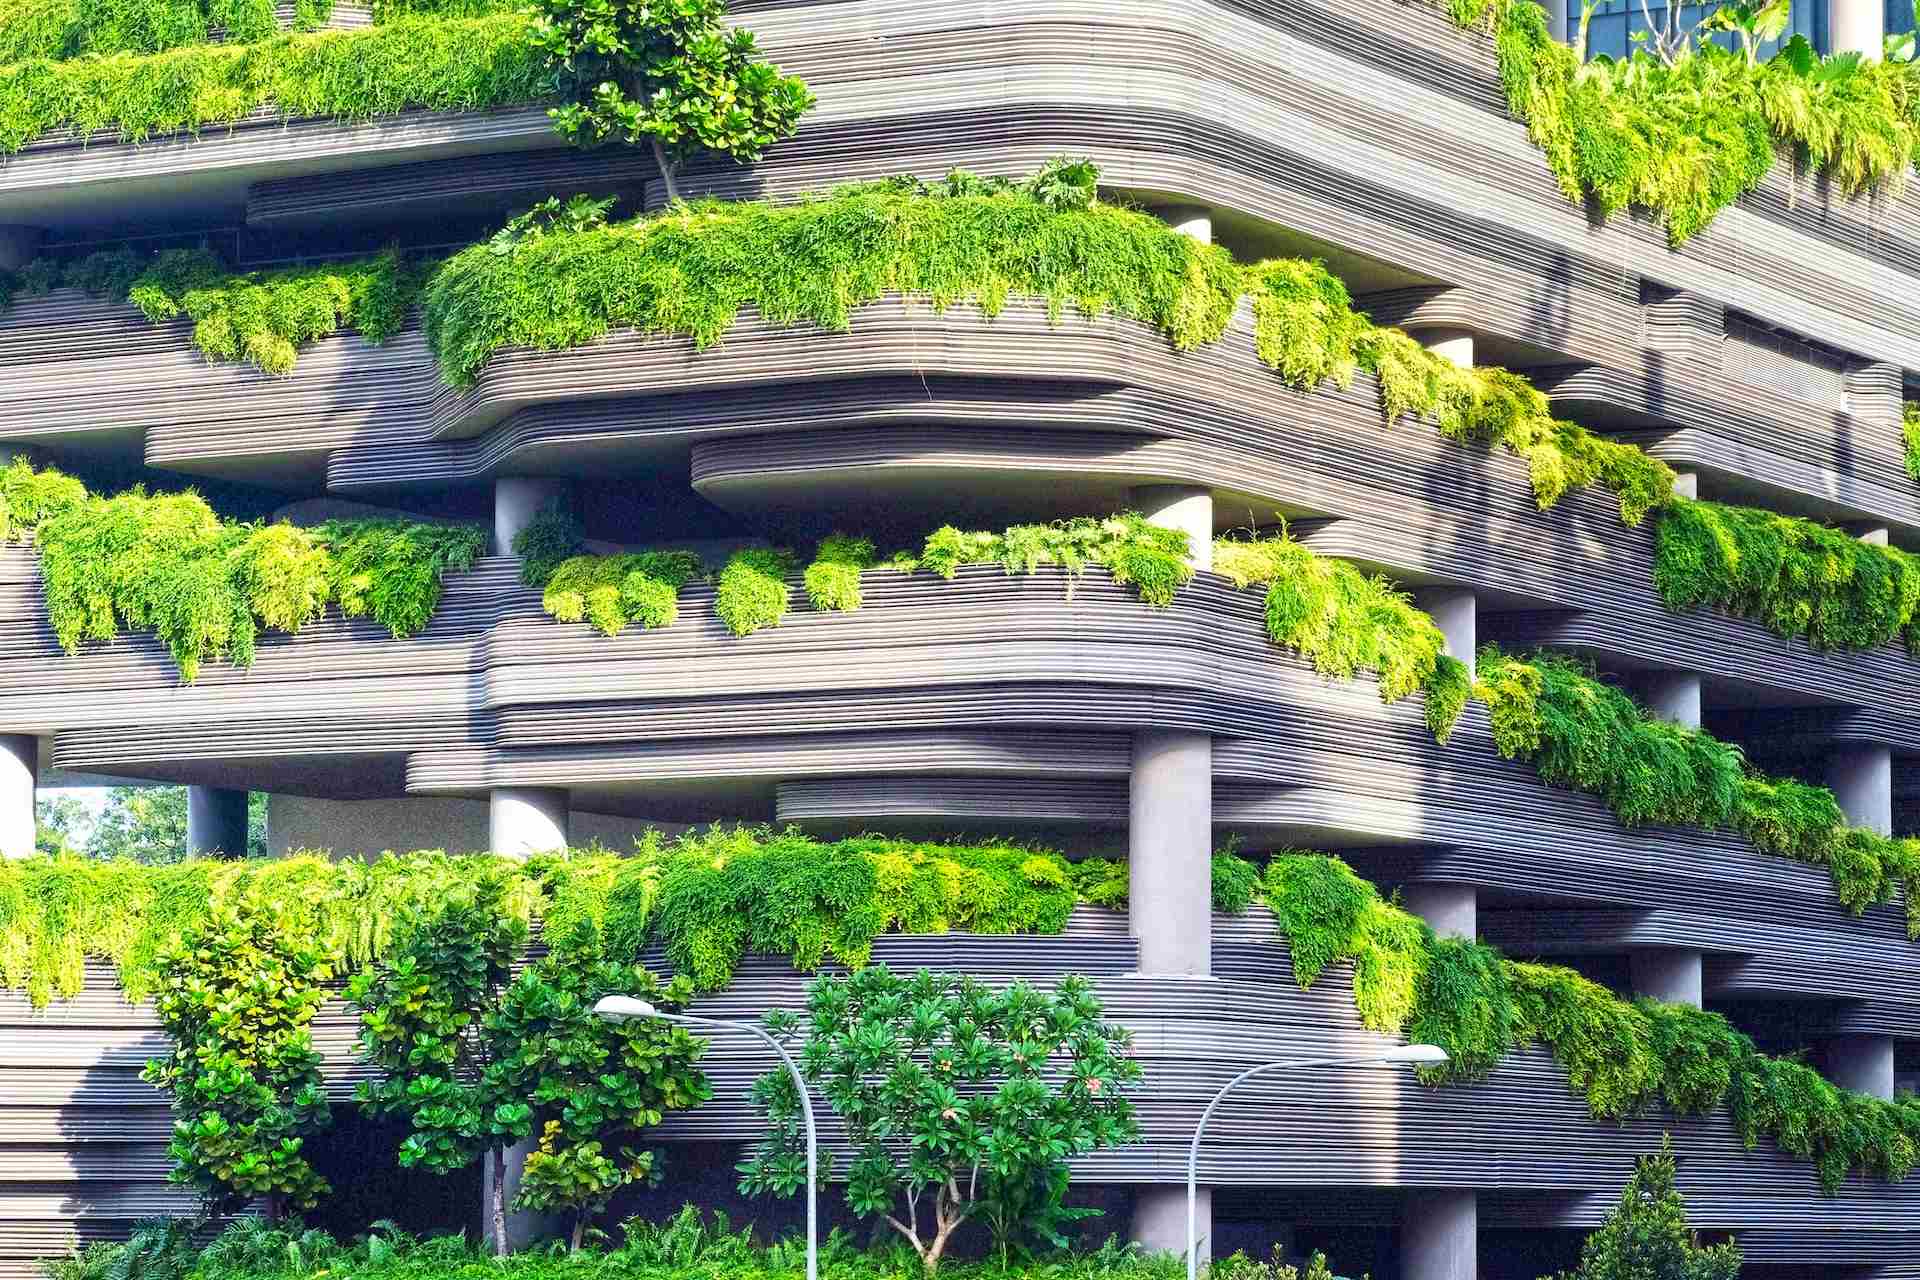 A building that was built with sustainability in mind.